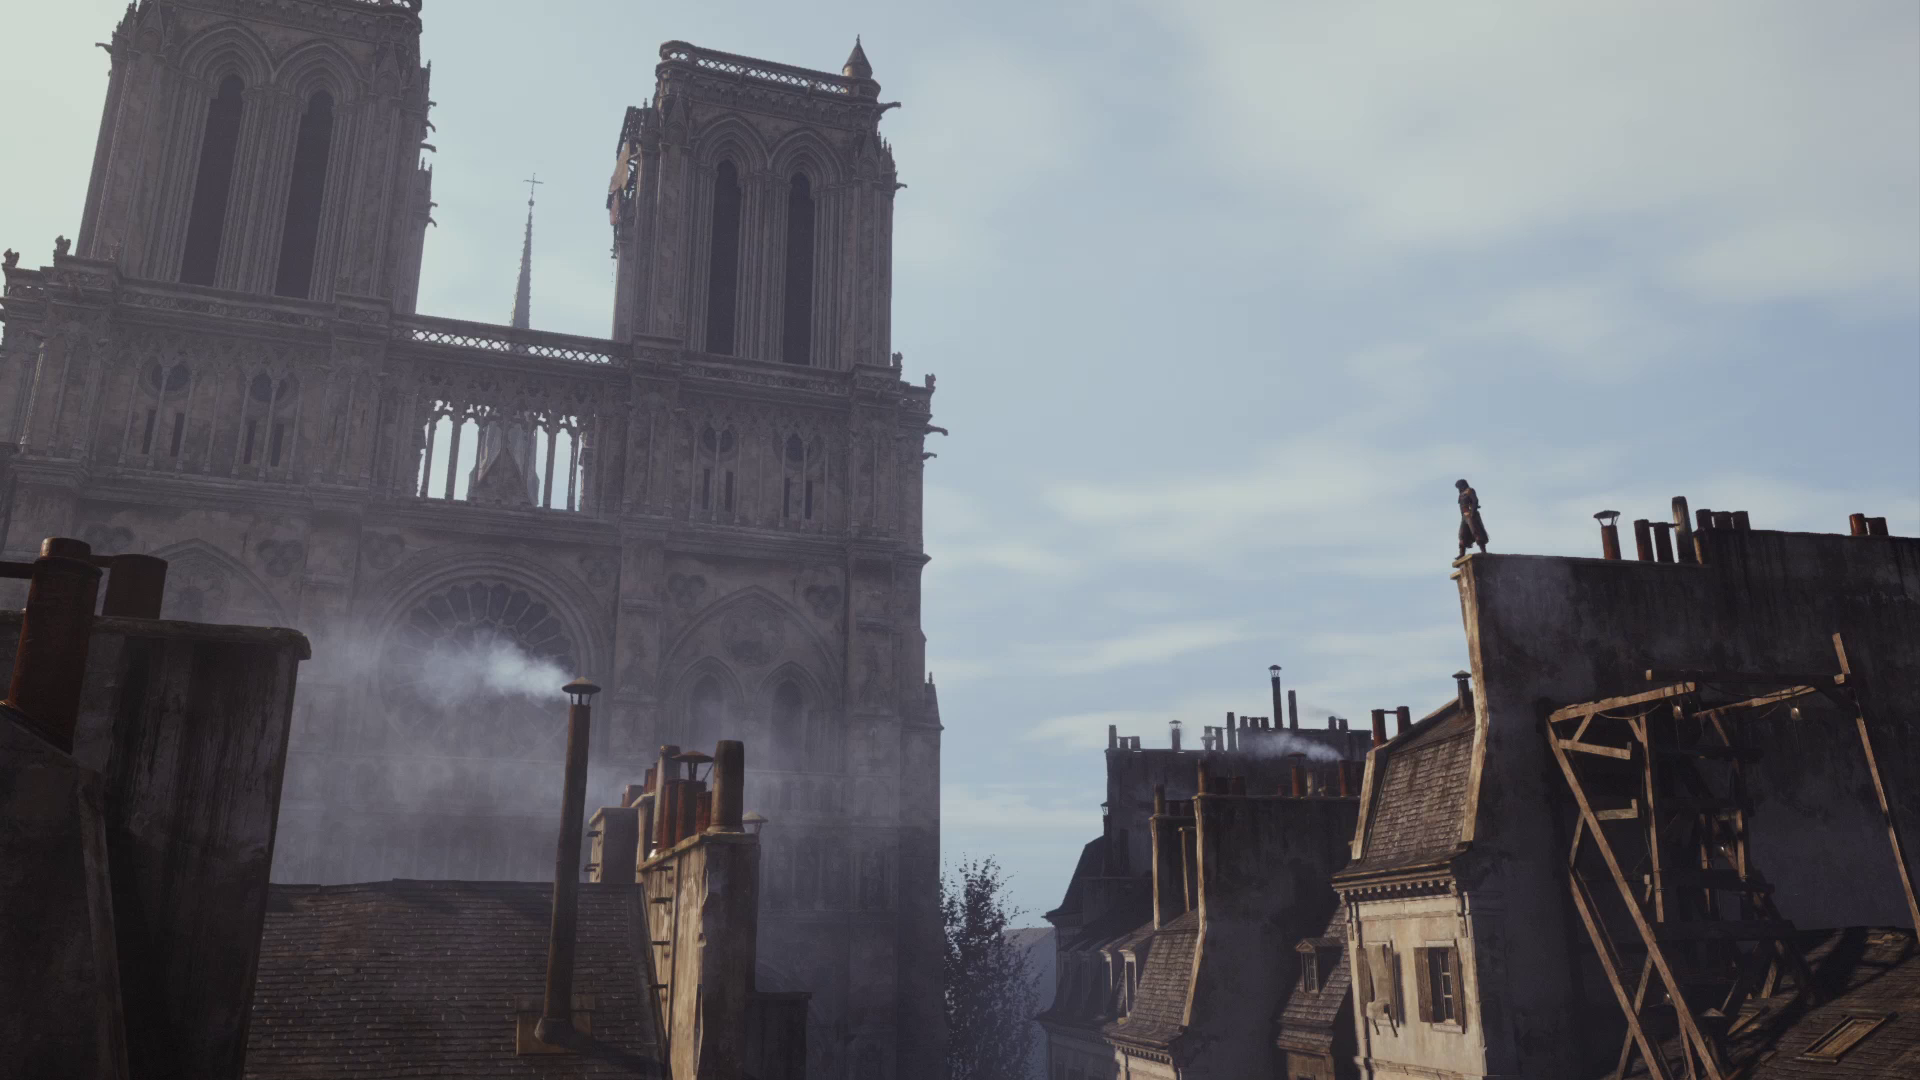 Video Game Assassin's Creed: Unity Wallpaper